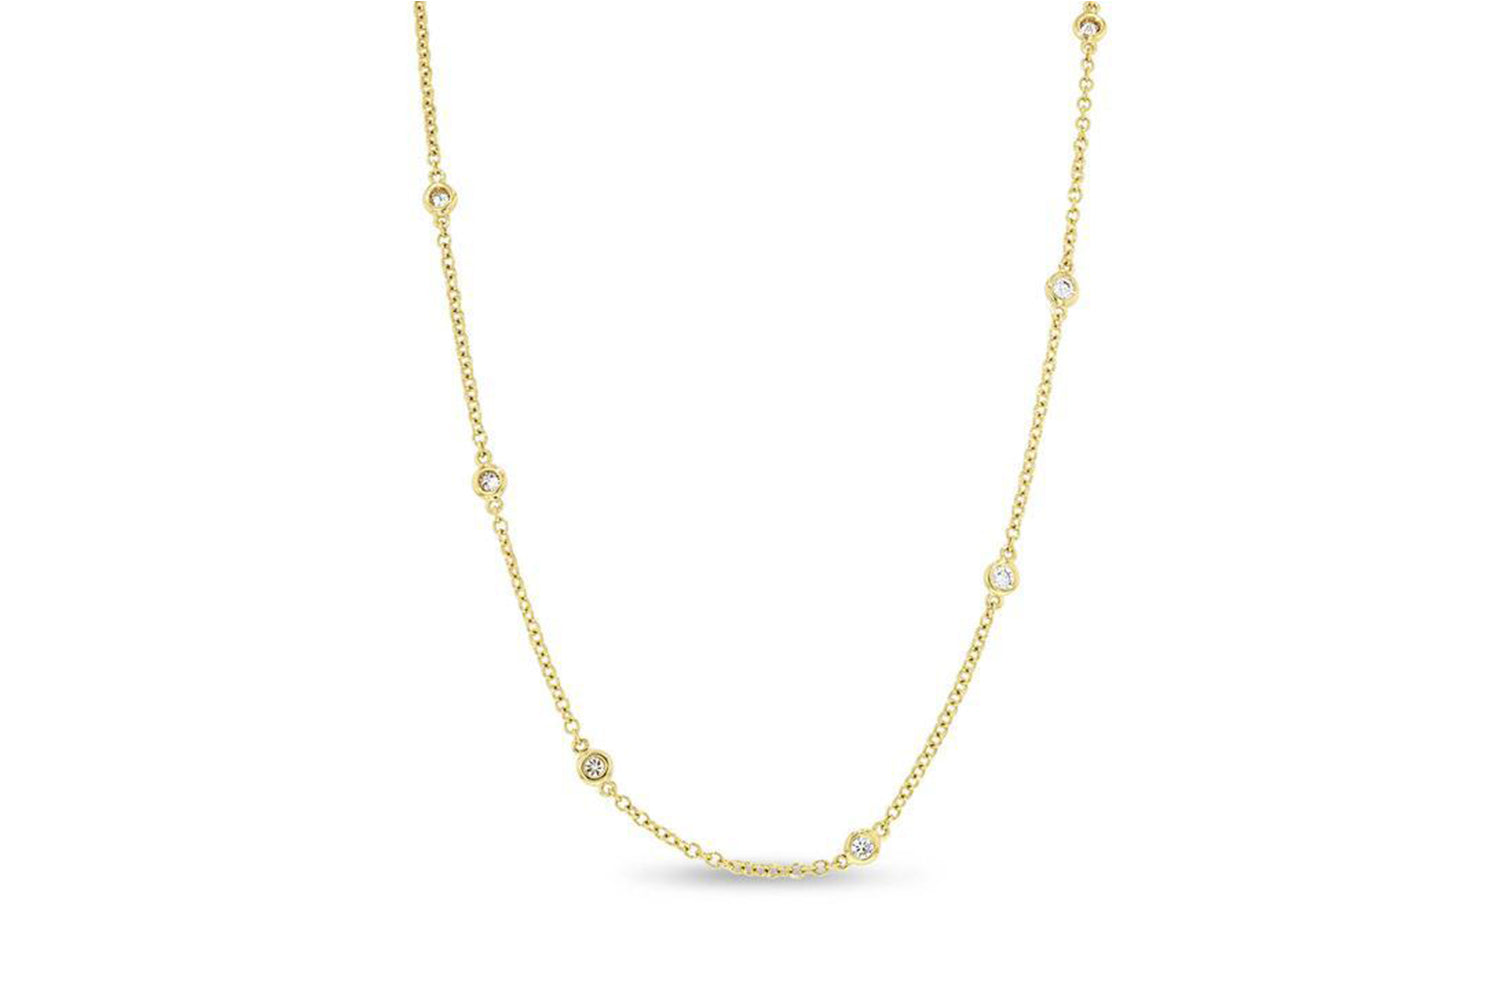 'Lucy' 18K Yellow Gold Diamond by the yard Necklace, 0.52 Carats